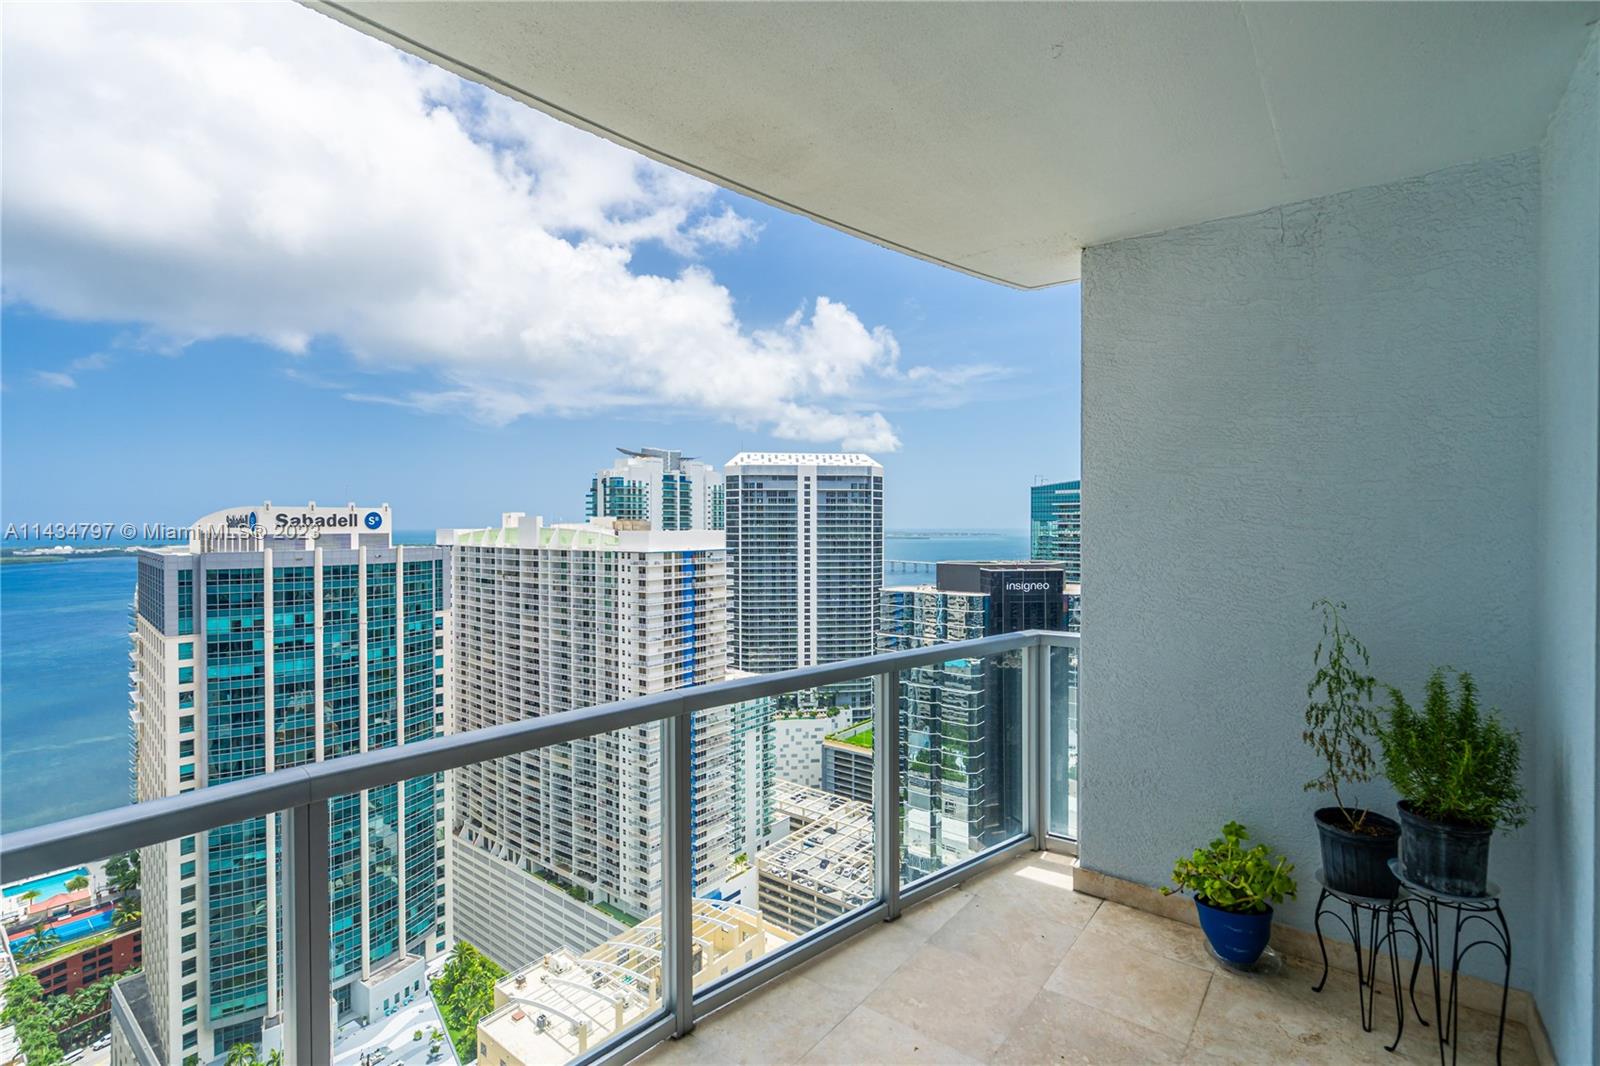 Amaxing opportunity! 1 Bed/1.5 Bath condo in the heart of Brickell and Biscayne Ave and ocean views. This condo is close to restaurants, shopping centers, downtown Miami and Brickell City Centre, a location you can't recreate!
The unit features an open layout, marble floors, and stainless steel appliances. The kitchen has beatiful ivy green backsplash tiles and dark gray granite countertop.   
The bedroom has sliding doors and an excellent view.
Take advantage of the resort-like amenities with state-the-art gym, jacuzzi and swimming pool, party room and much more!
Excellent opportunity for your next home and/or investing.
Call the listing agent today to schedule a showing!